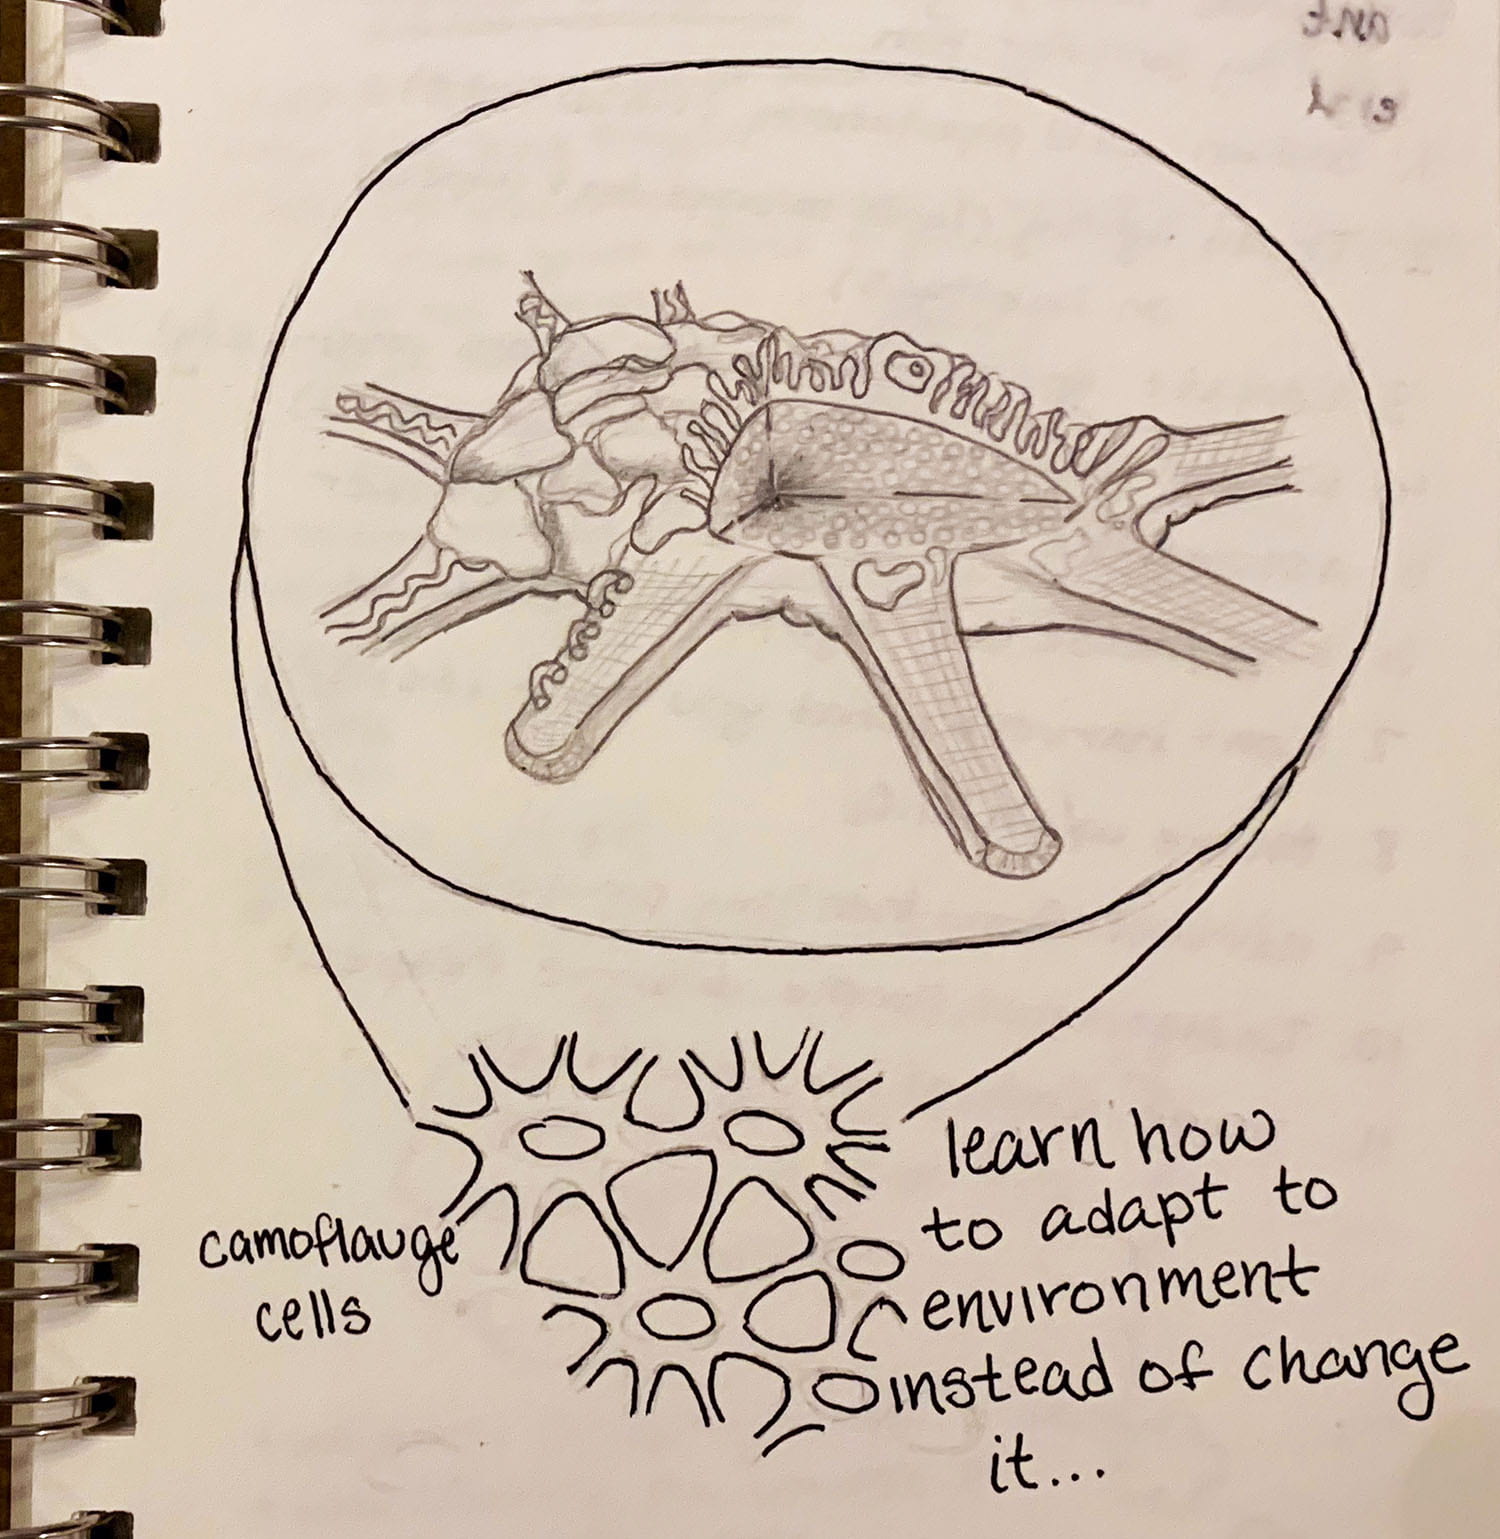 pencil and ink anatomy drawing of a starfish, circled, and cells labeled "camoflauge cells" with written text "learn how to adapt to environment instead of change it..."